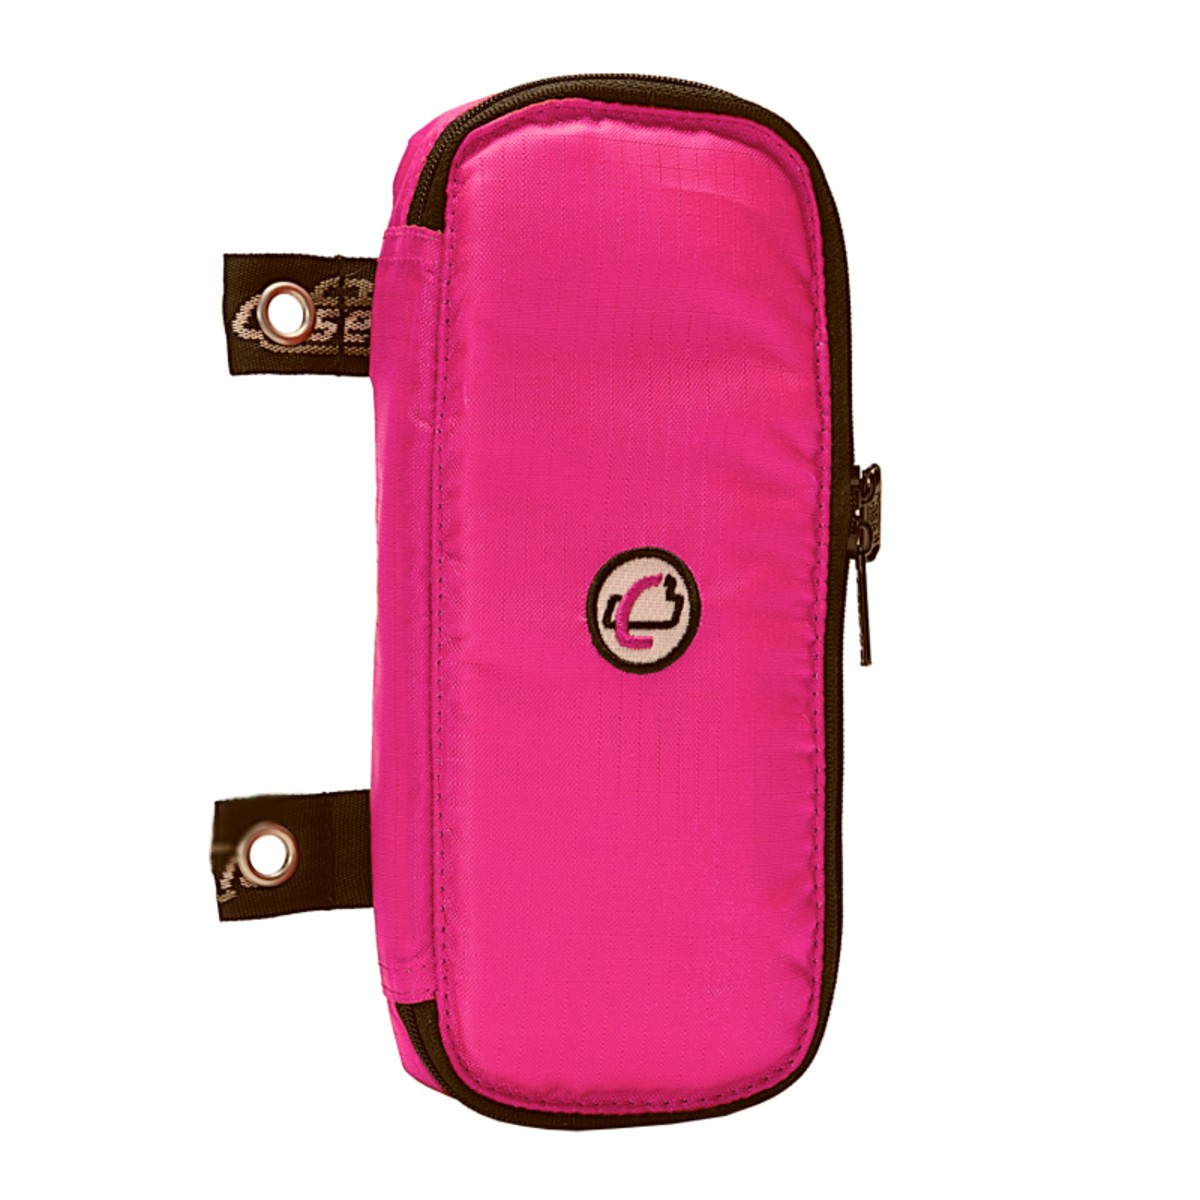 The Pouch - Case•it - the perfect binder accessory